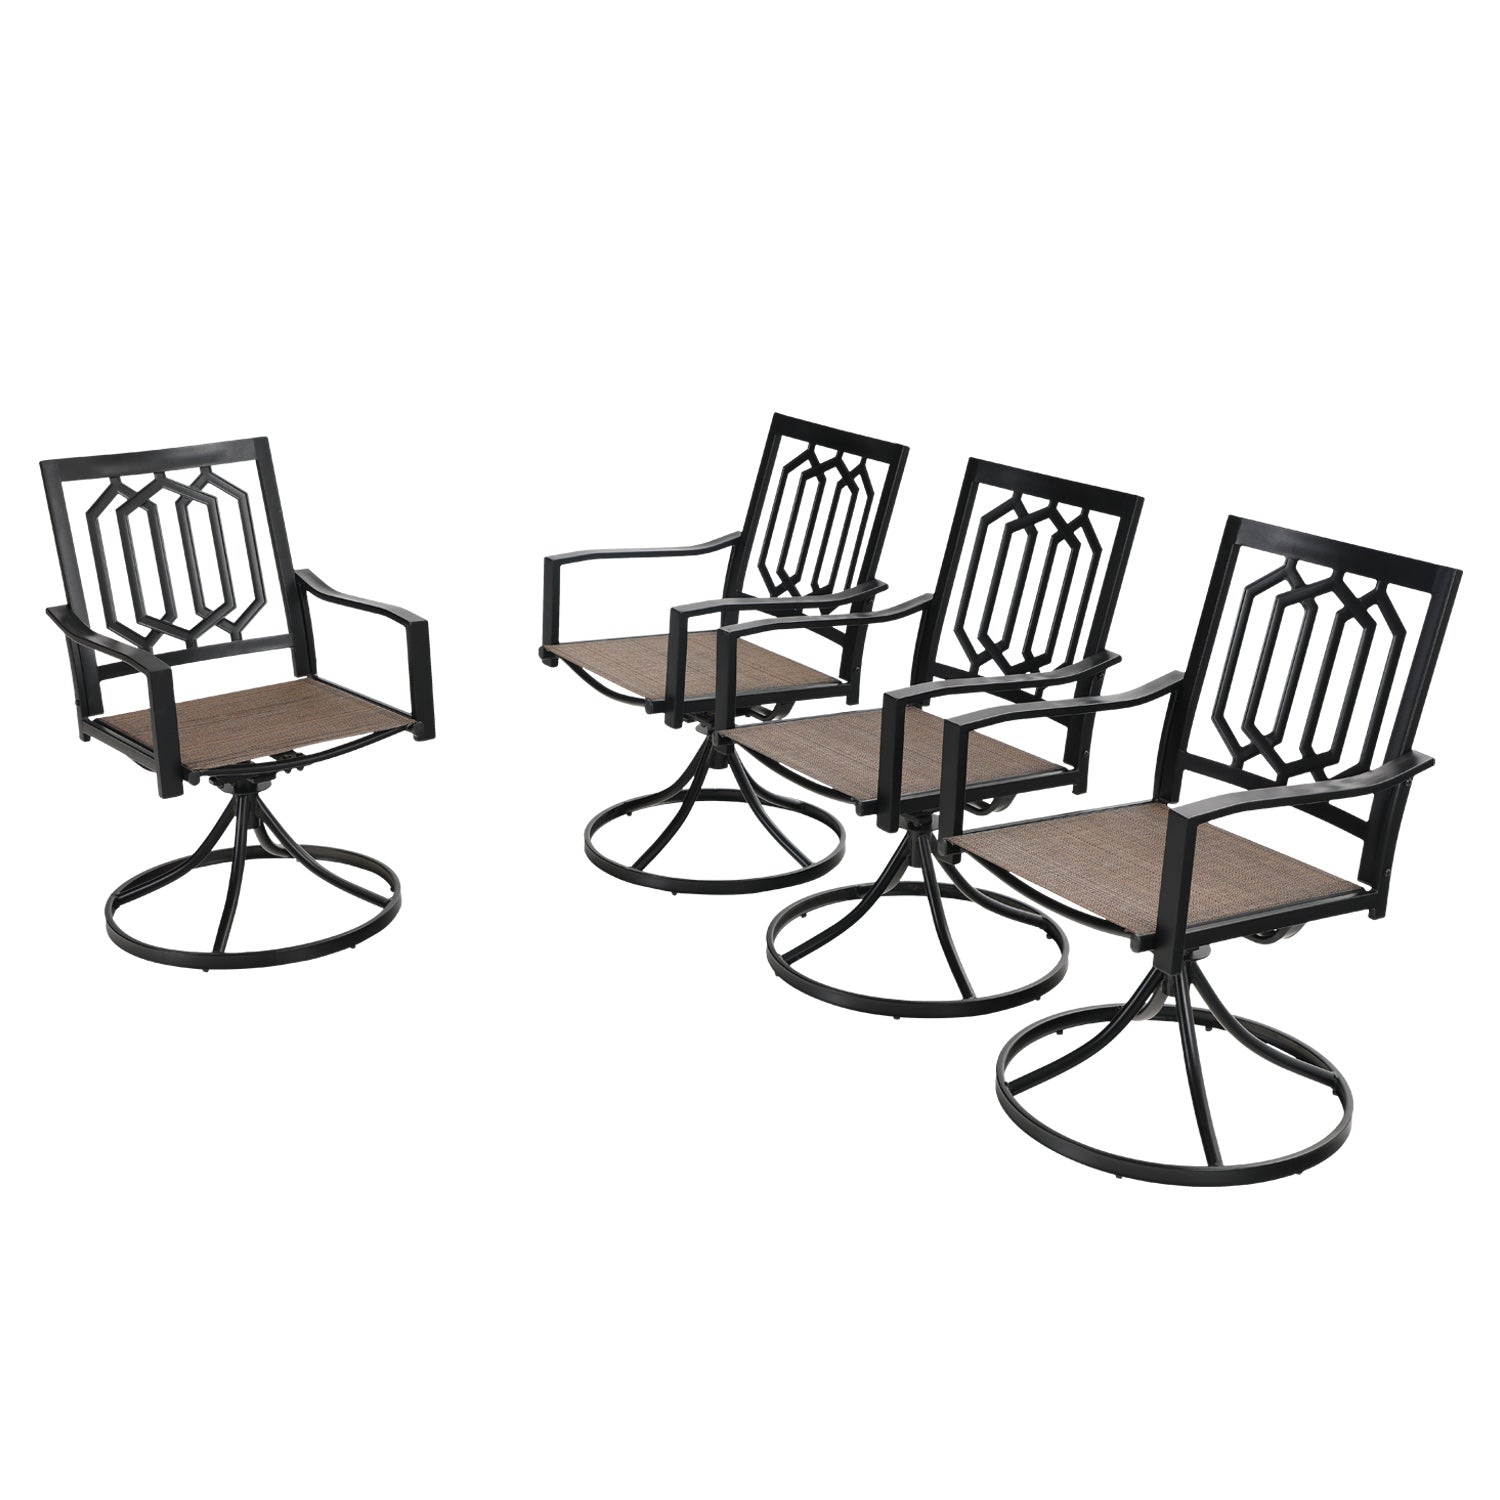 Sophia & William Textilene Seat Patio Dining Swivel Chairs with Steel Frame, Set of 4